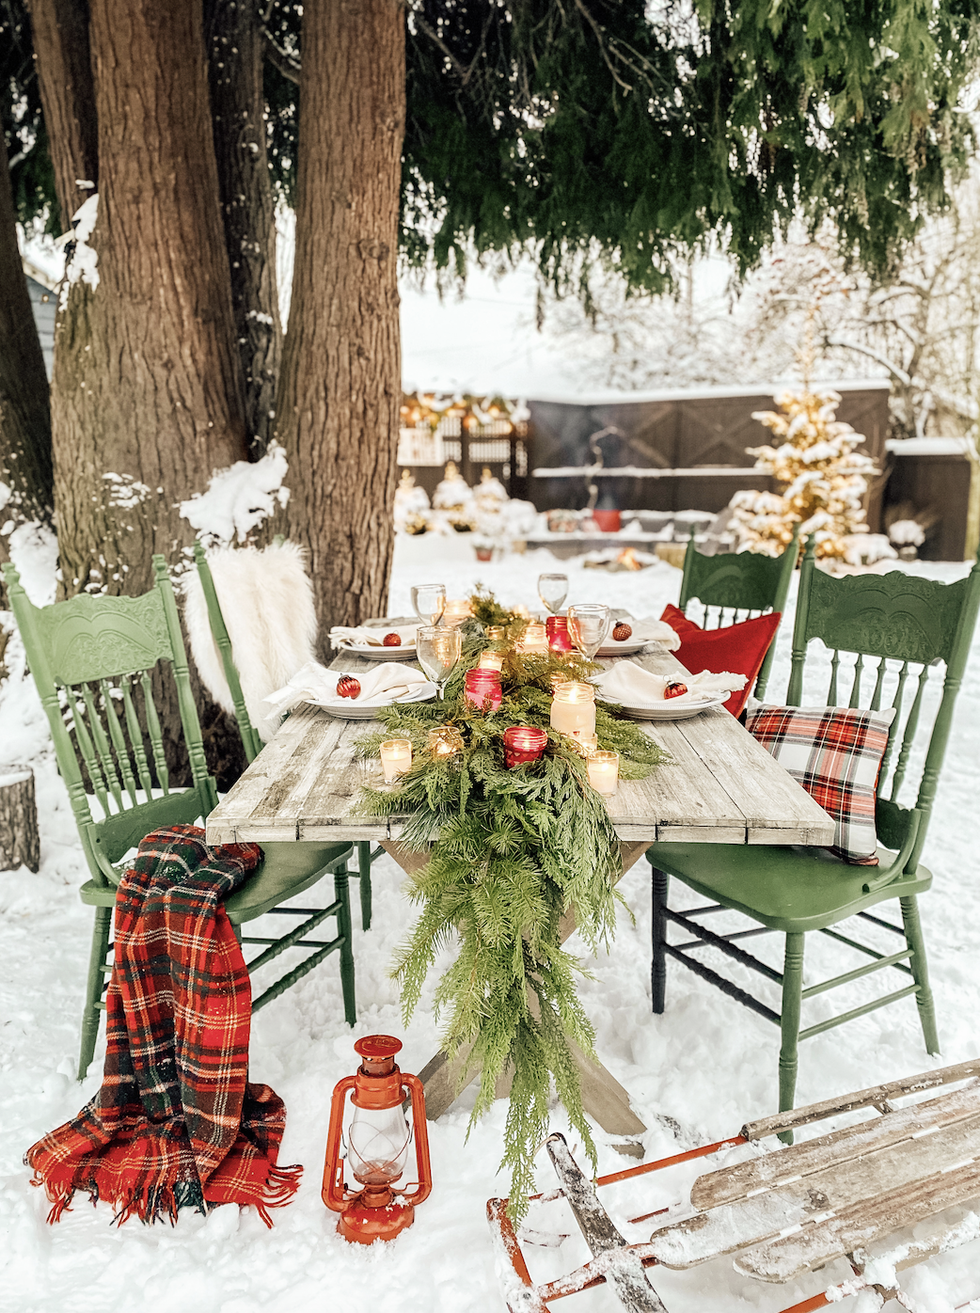 Simple Holiday outdoor decor to last all winter!